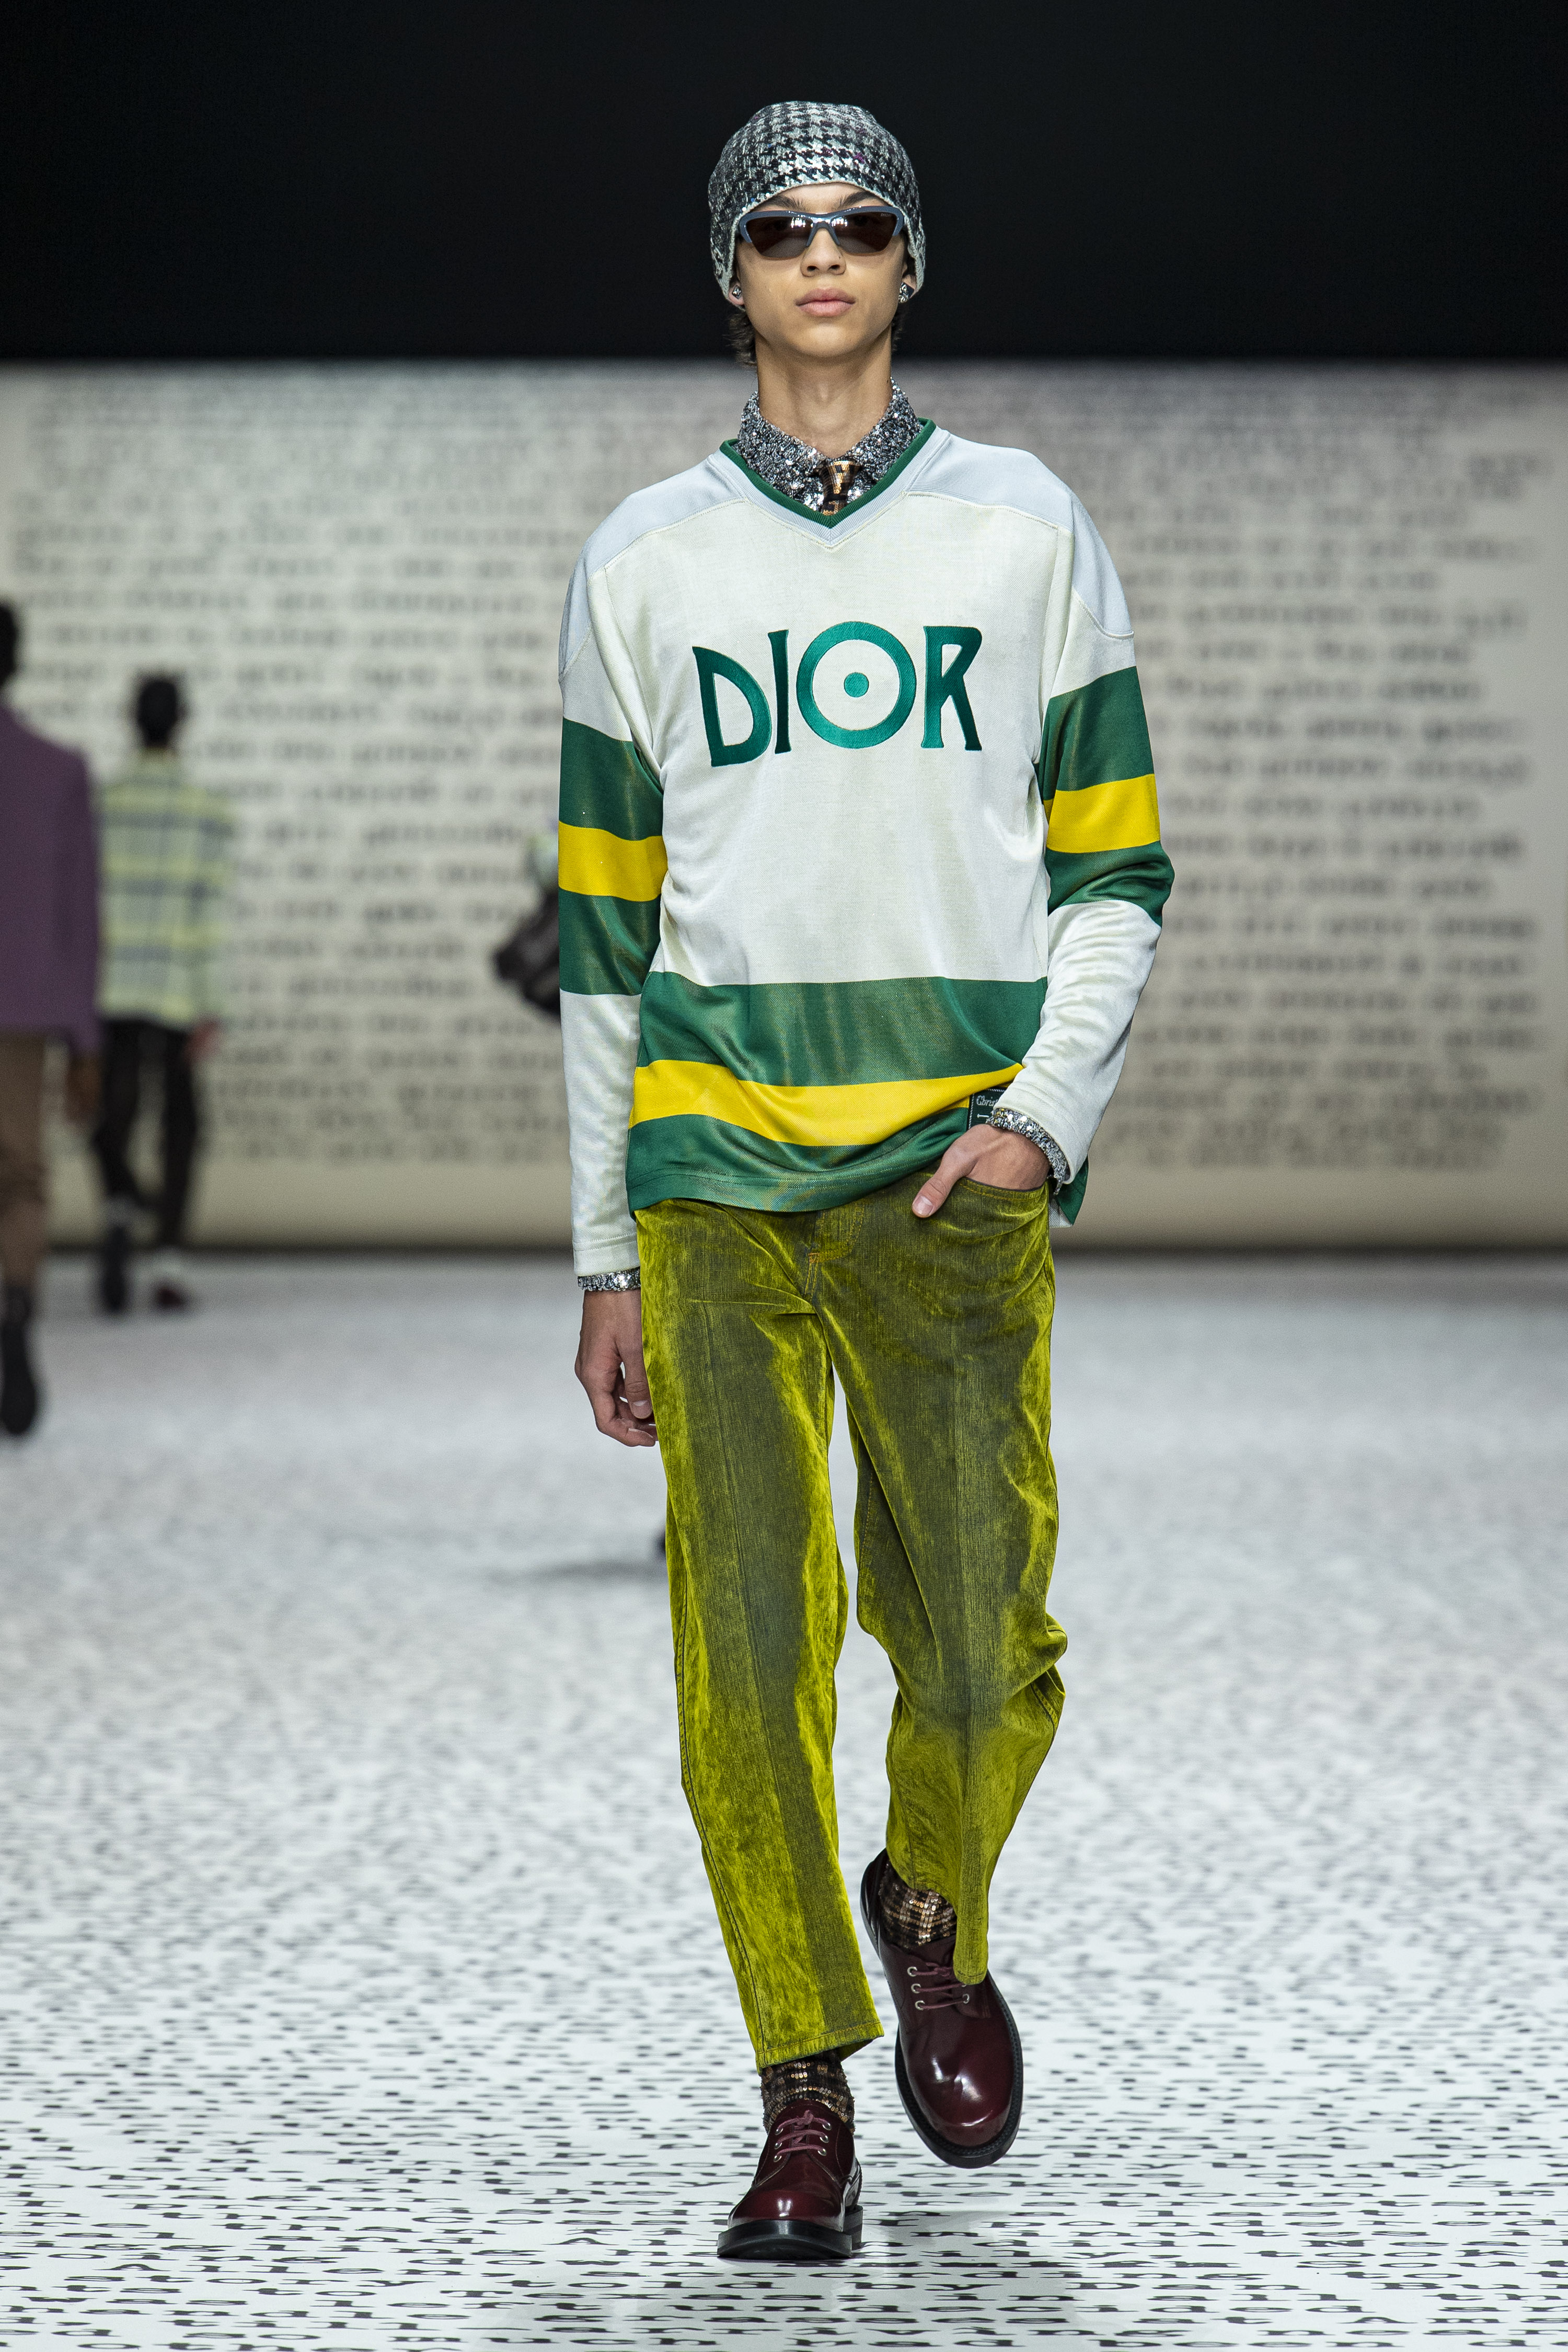 Dior Taps Into the Beat Generation